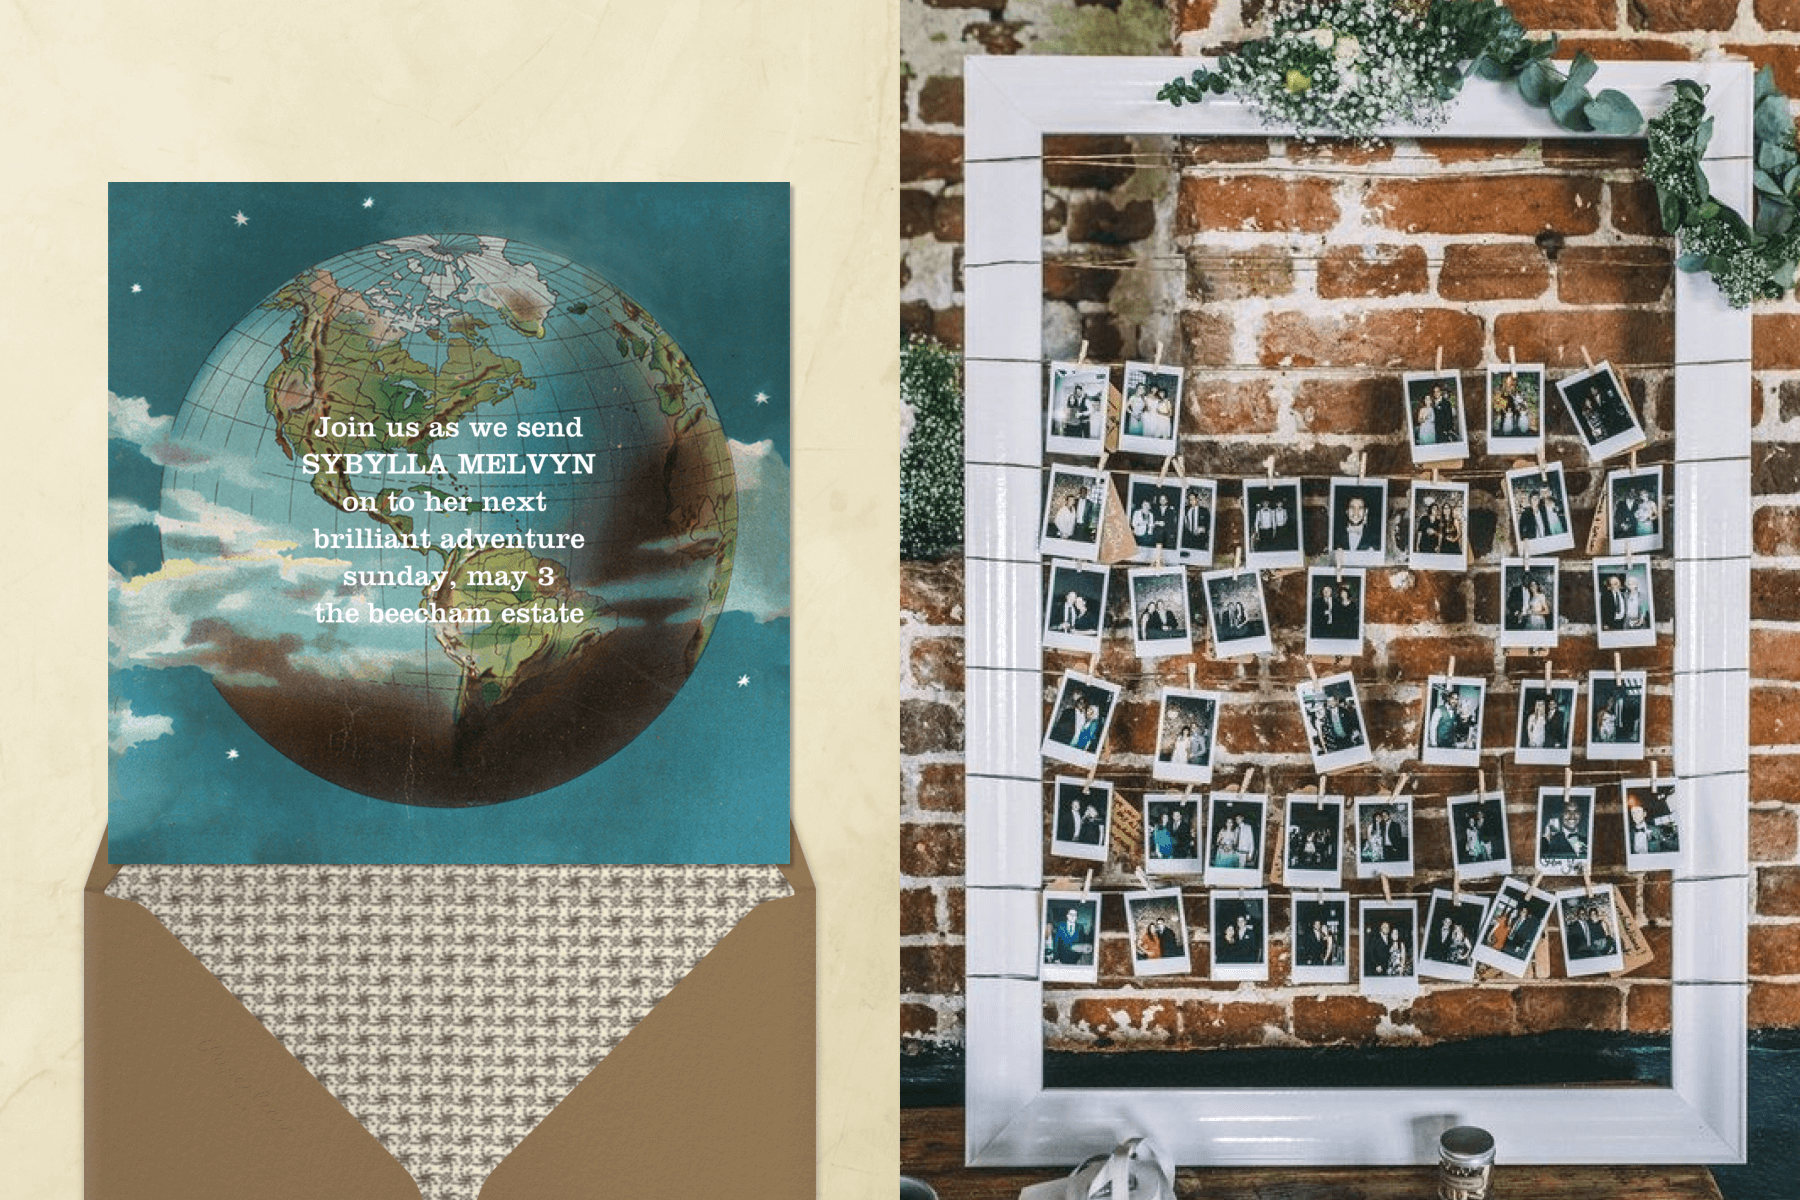 Left: A going away party invitation with a globe of Earth surrounded by light clouds in a blue sky. Right: In a large frame, rows of Instax photos are strung across a brick wall.